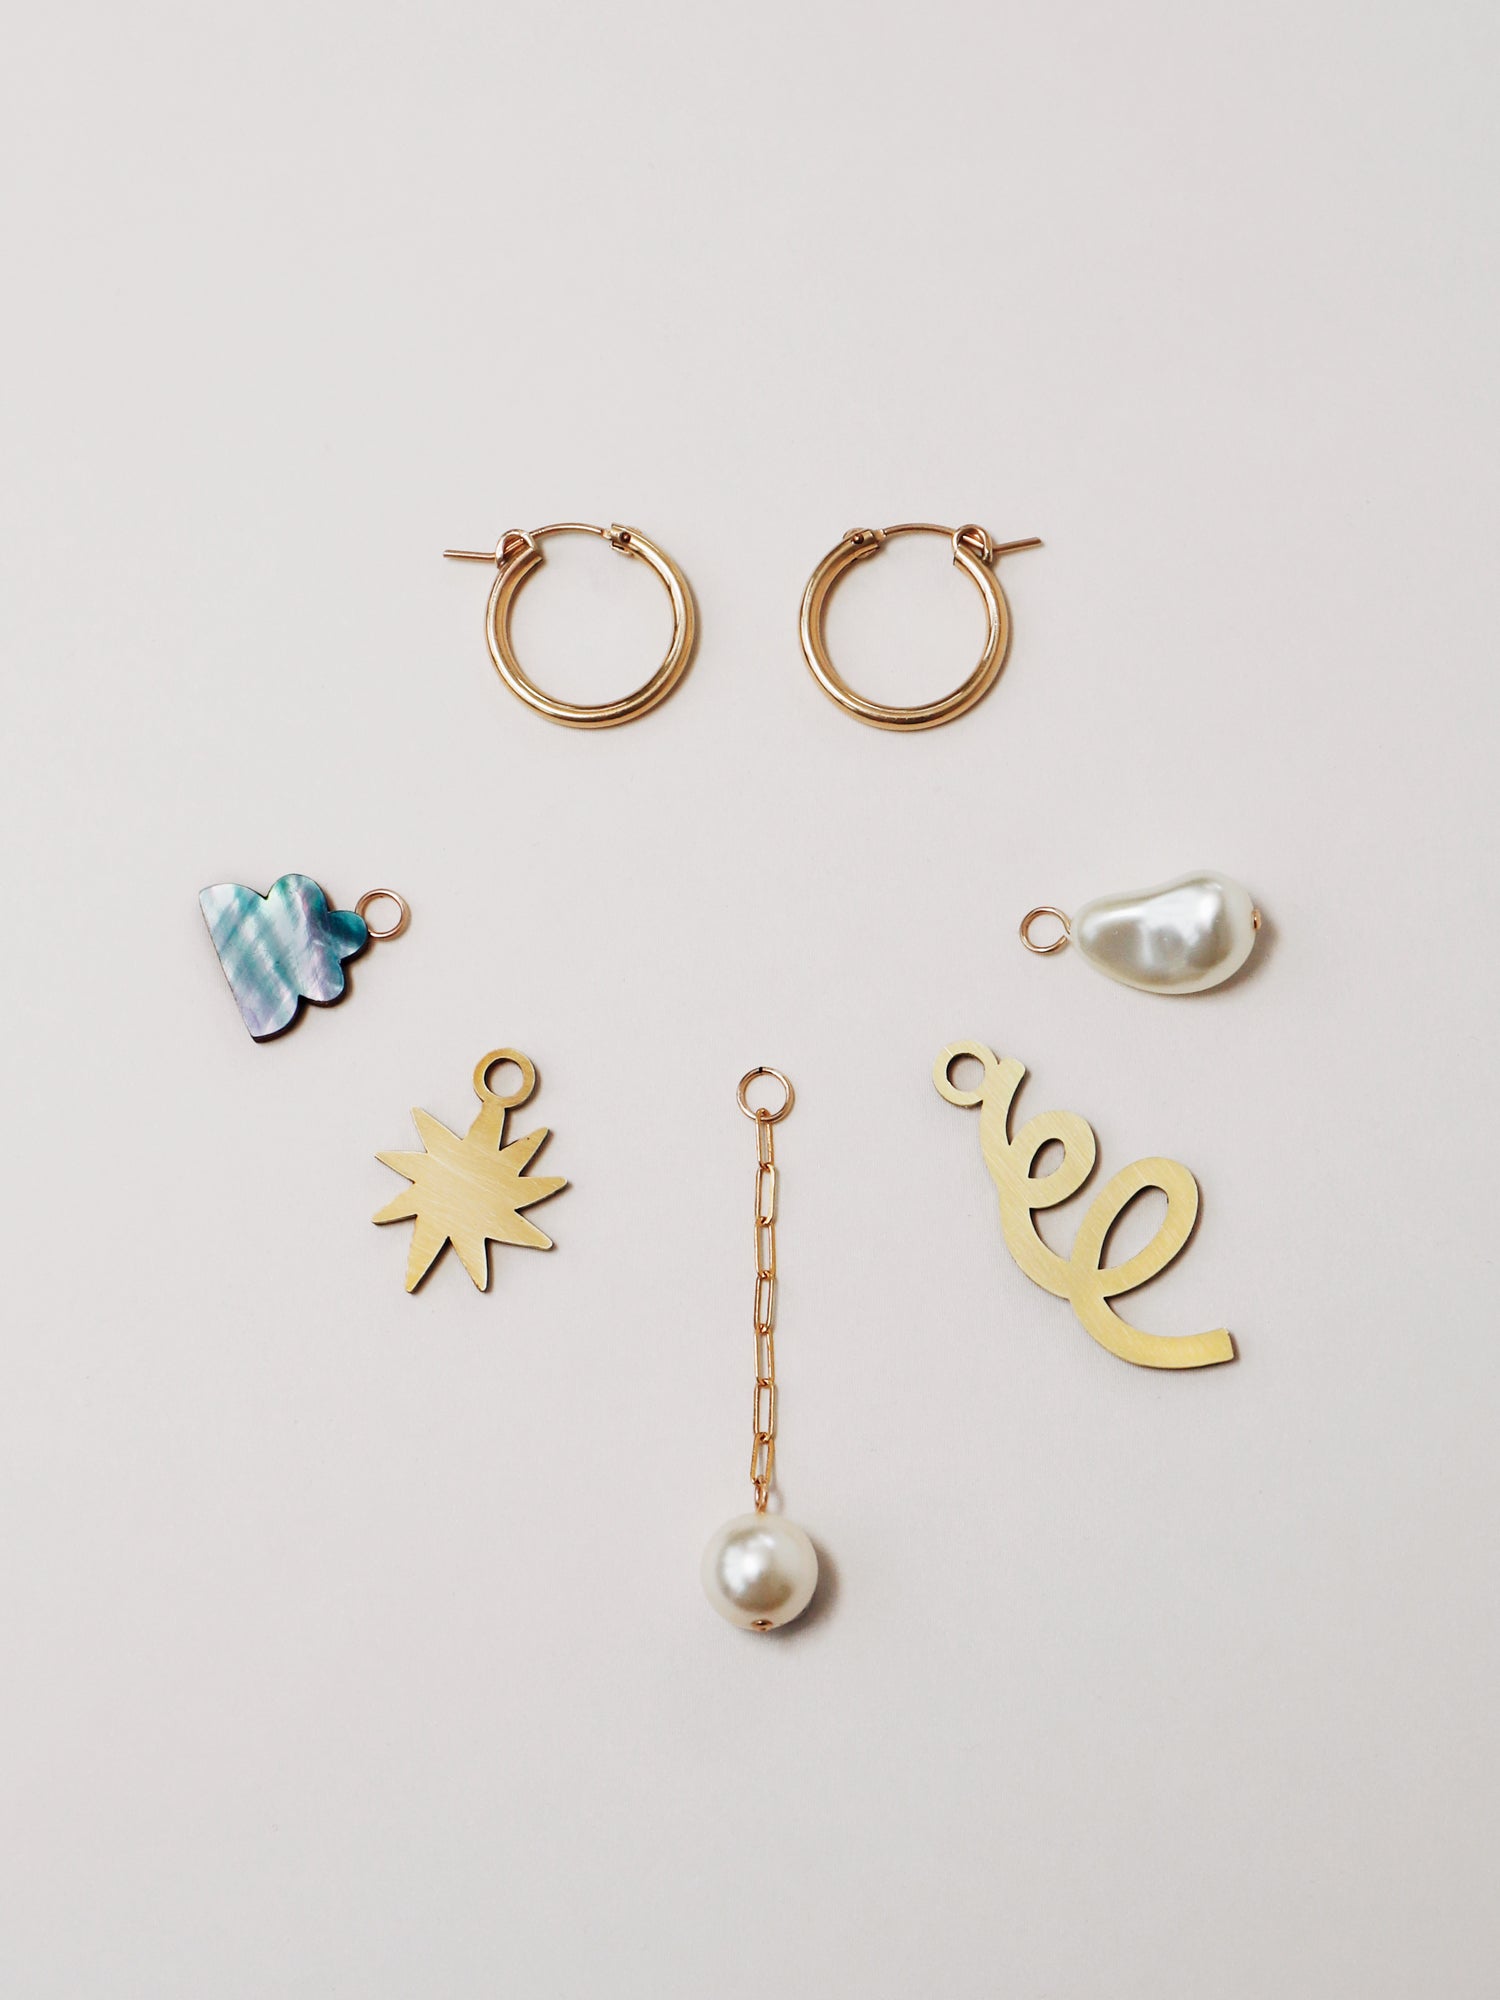 Confetti Charm Hoops in Brass. A playful mix 'n' match hoops set with 5 interchangeable charms including our curly wurly pieces, Czech glass baroque pearls, 14k gold-filled chain and sterling silver earring posts. Made in the UK by Wolf & Moon.